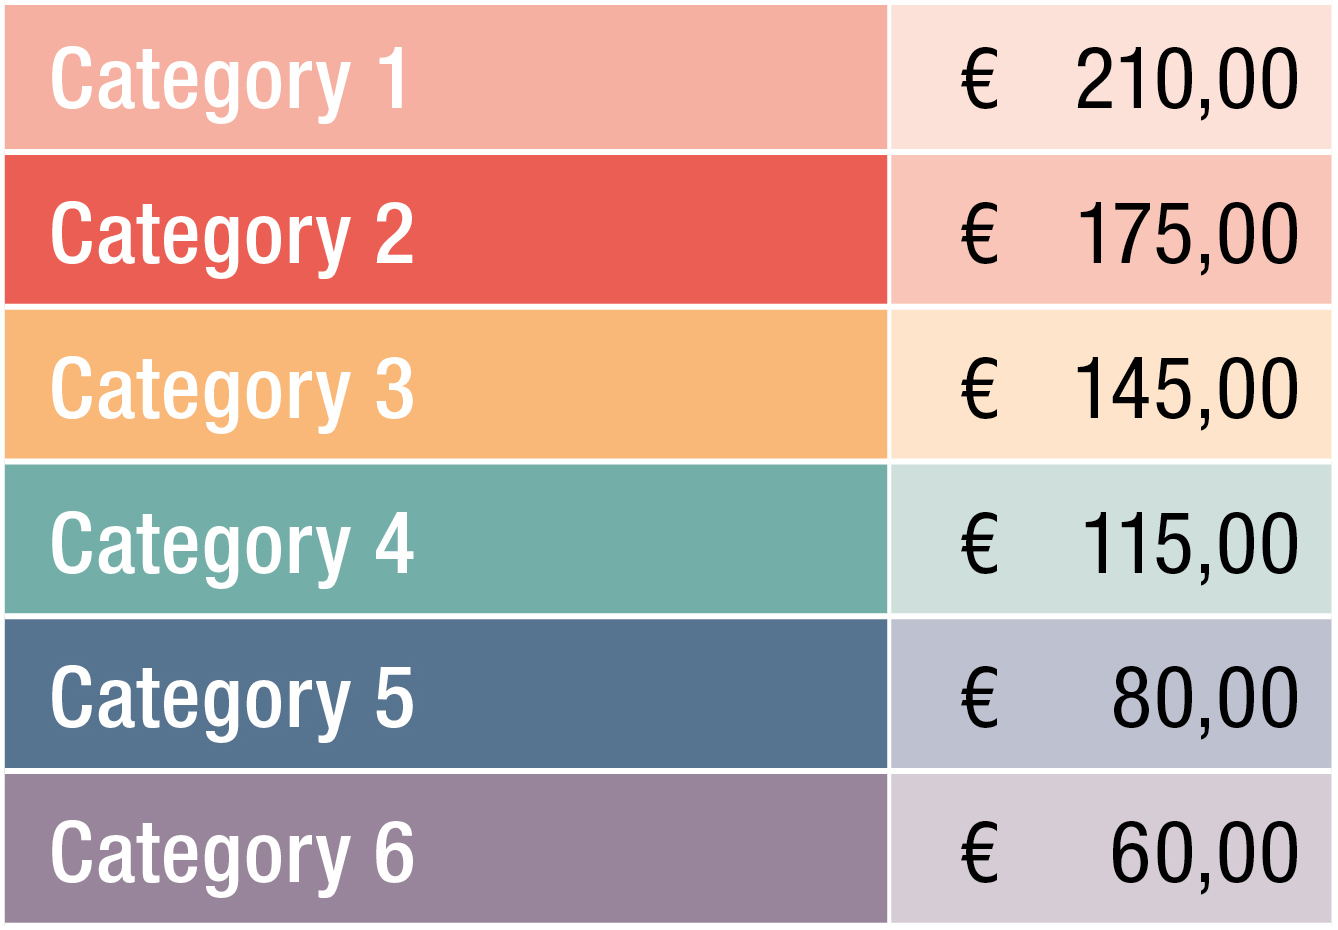 Classic in the Alps Ticket Prices